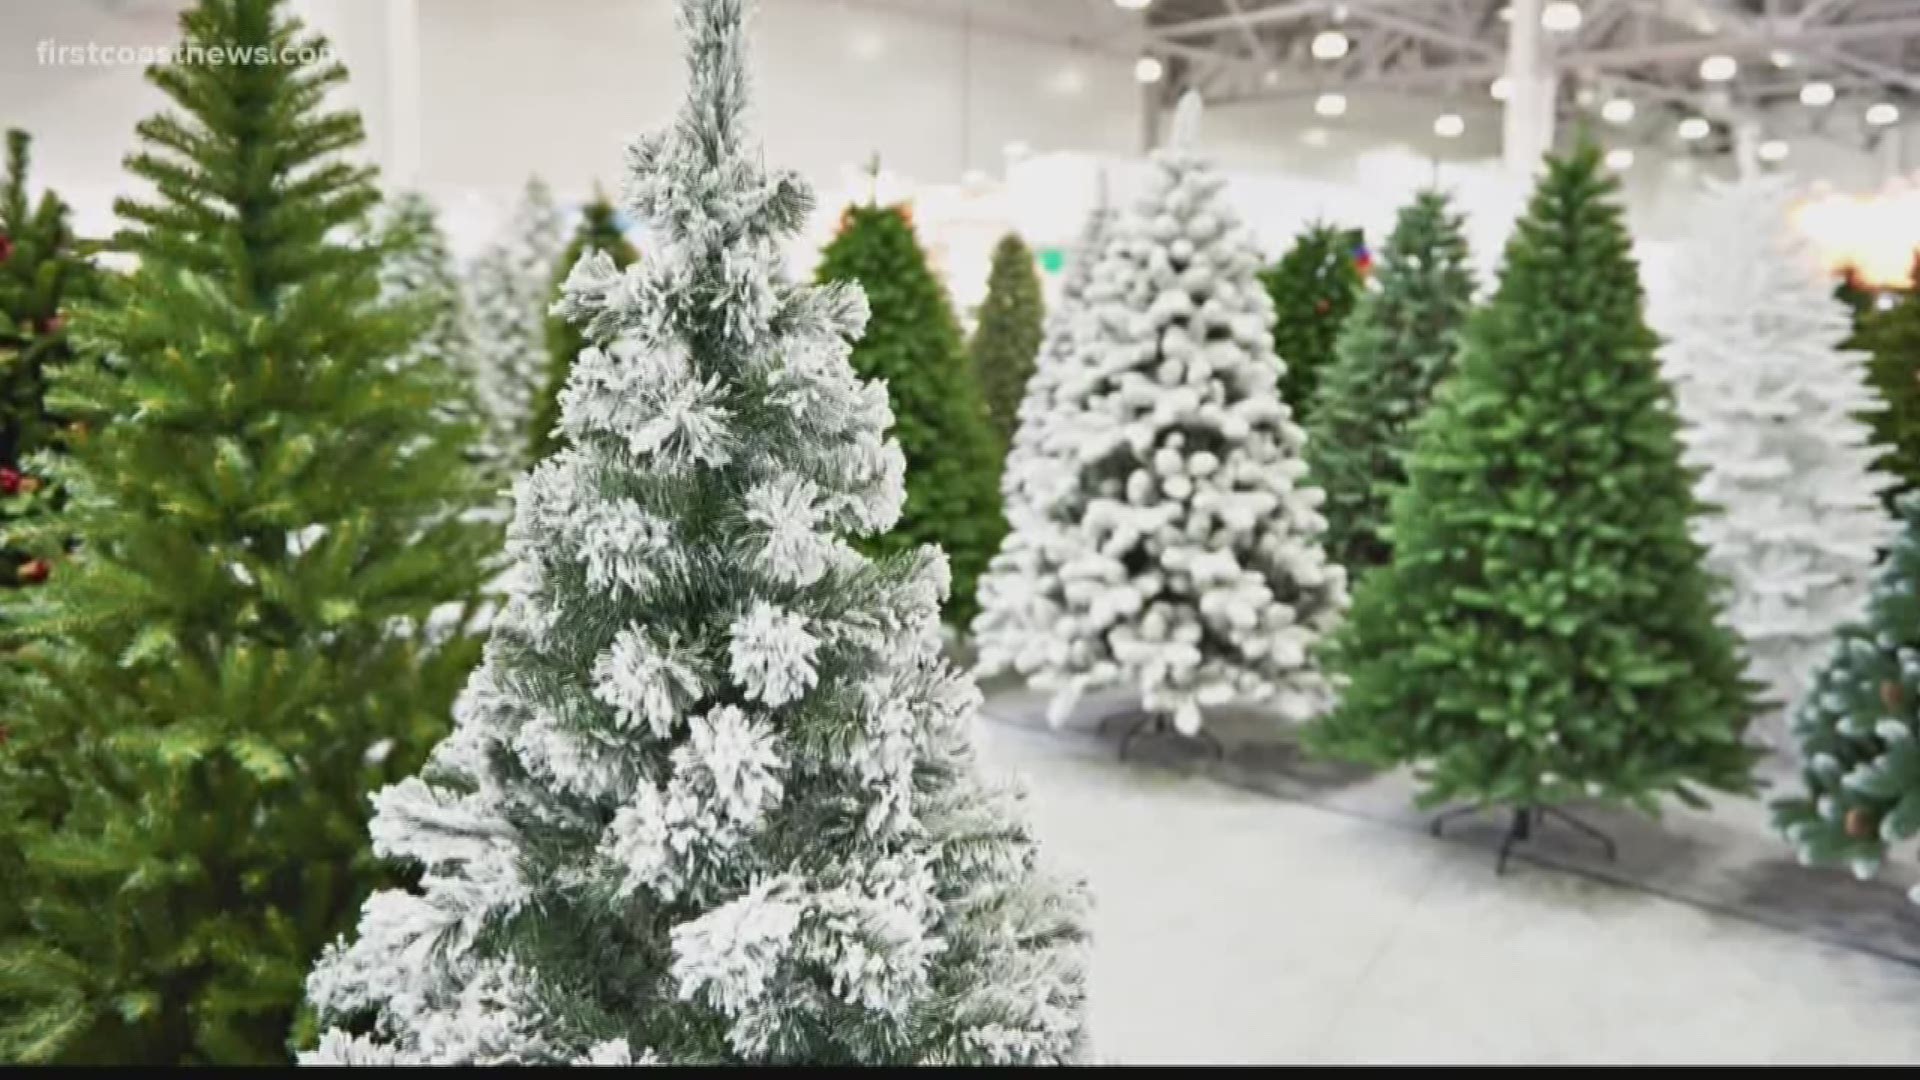 Some people are opting for fake Christmas trees this year but traditionalists say that there's no beating the real thing. What do you think?